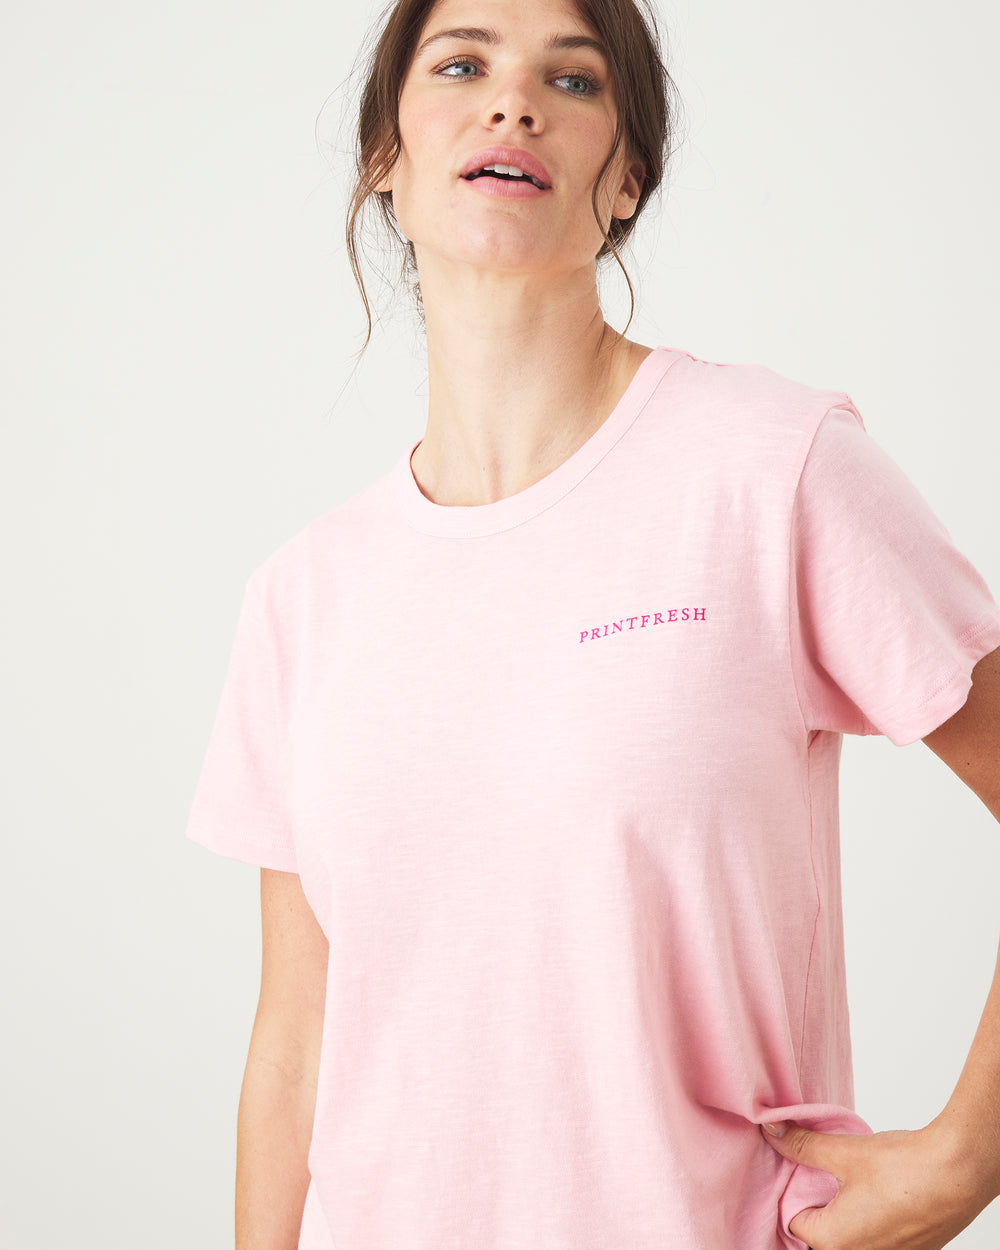 Oversized Graphic Tee - Live On The Bright Side - Pink Peony - Printfresh